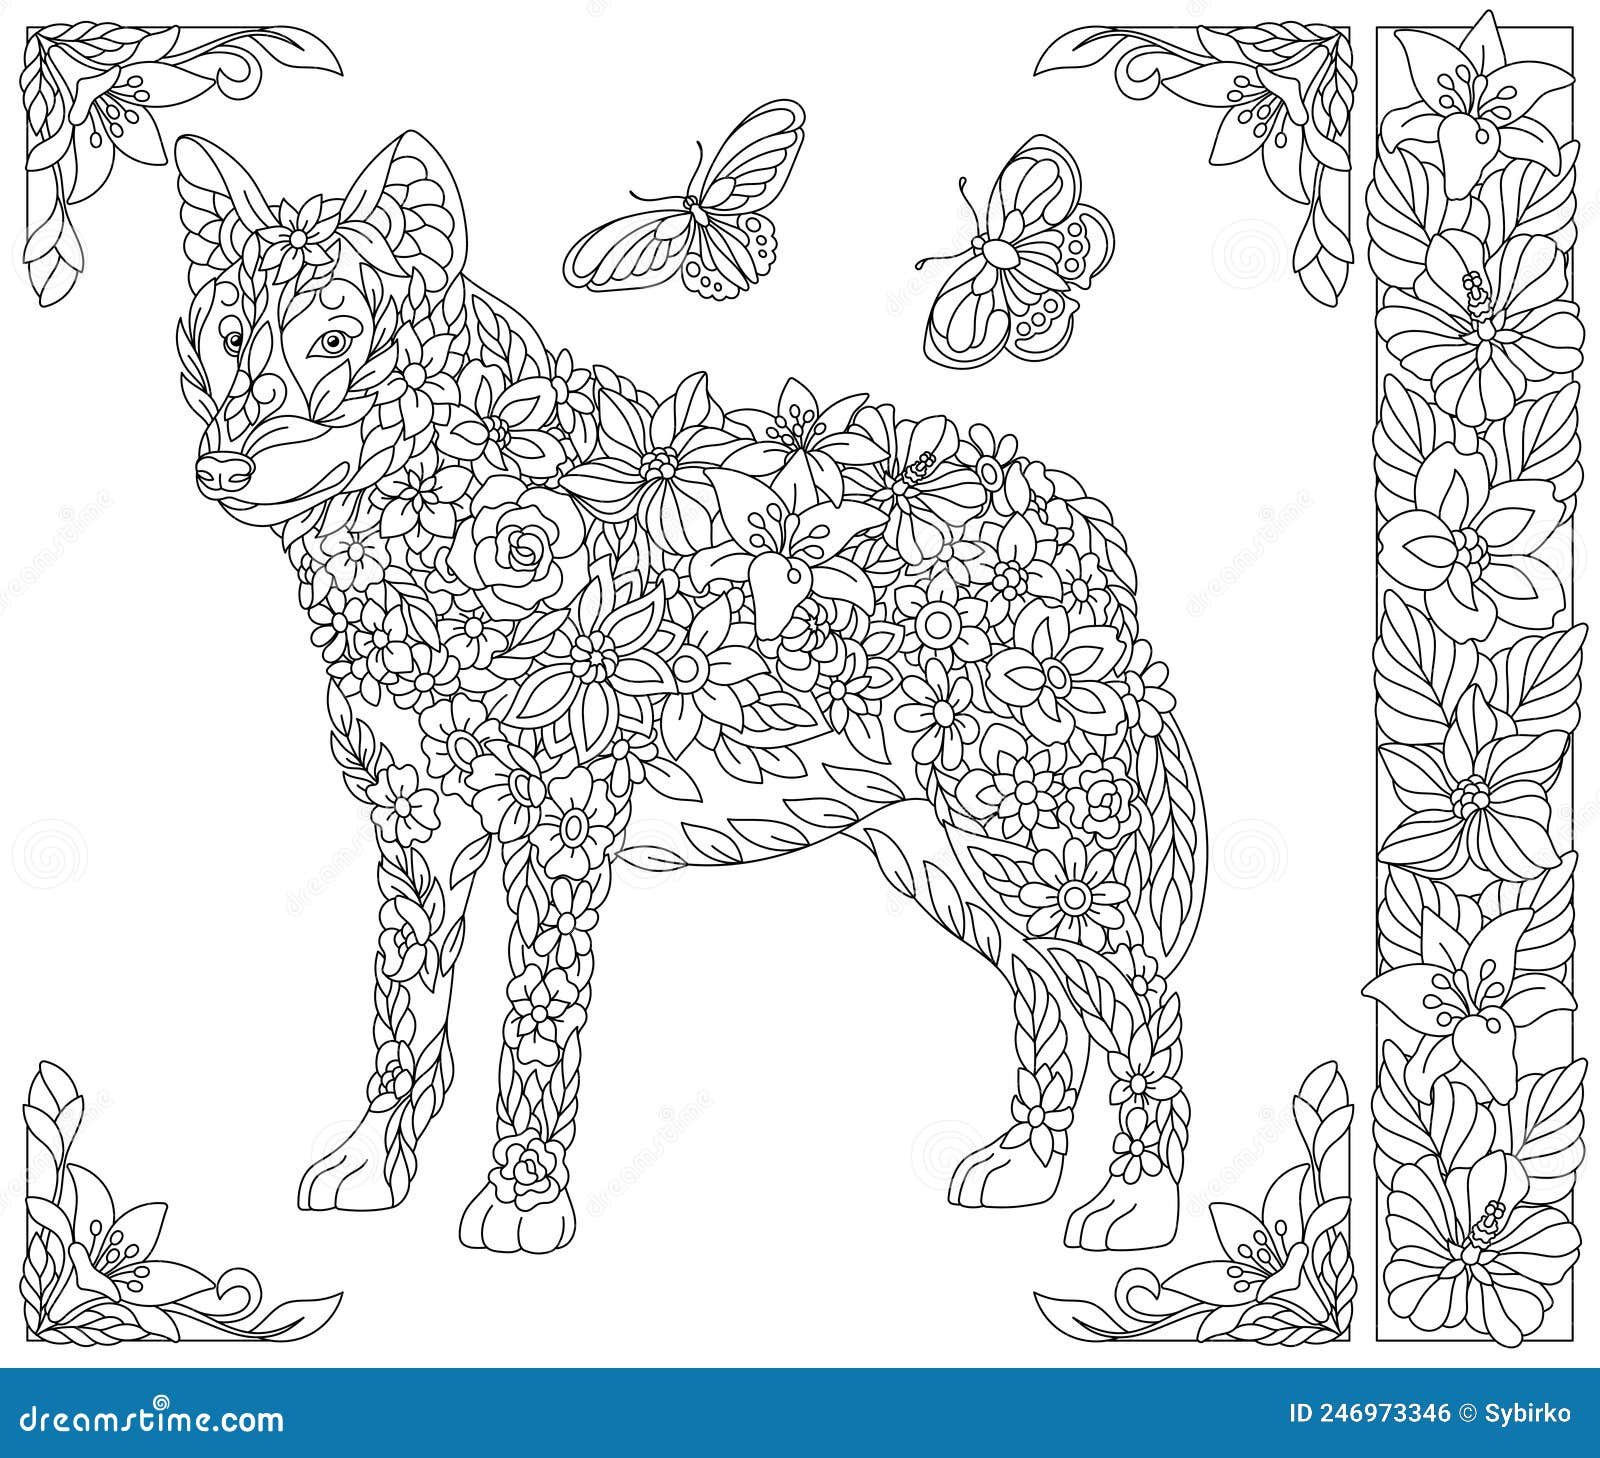 Floral wolf coloring book page stock vector